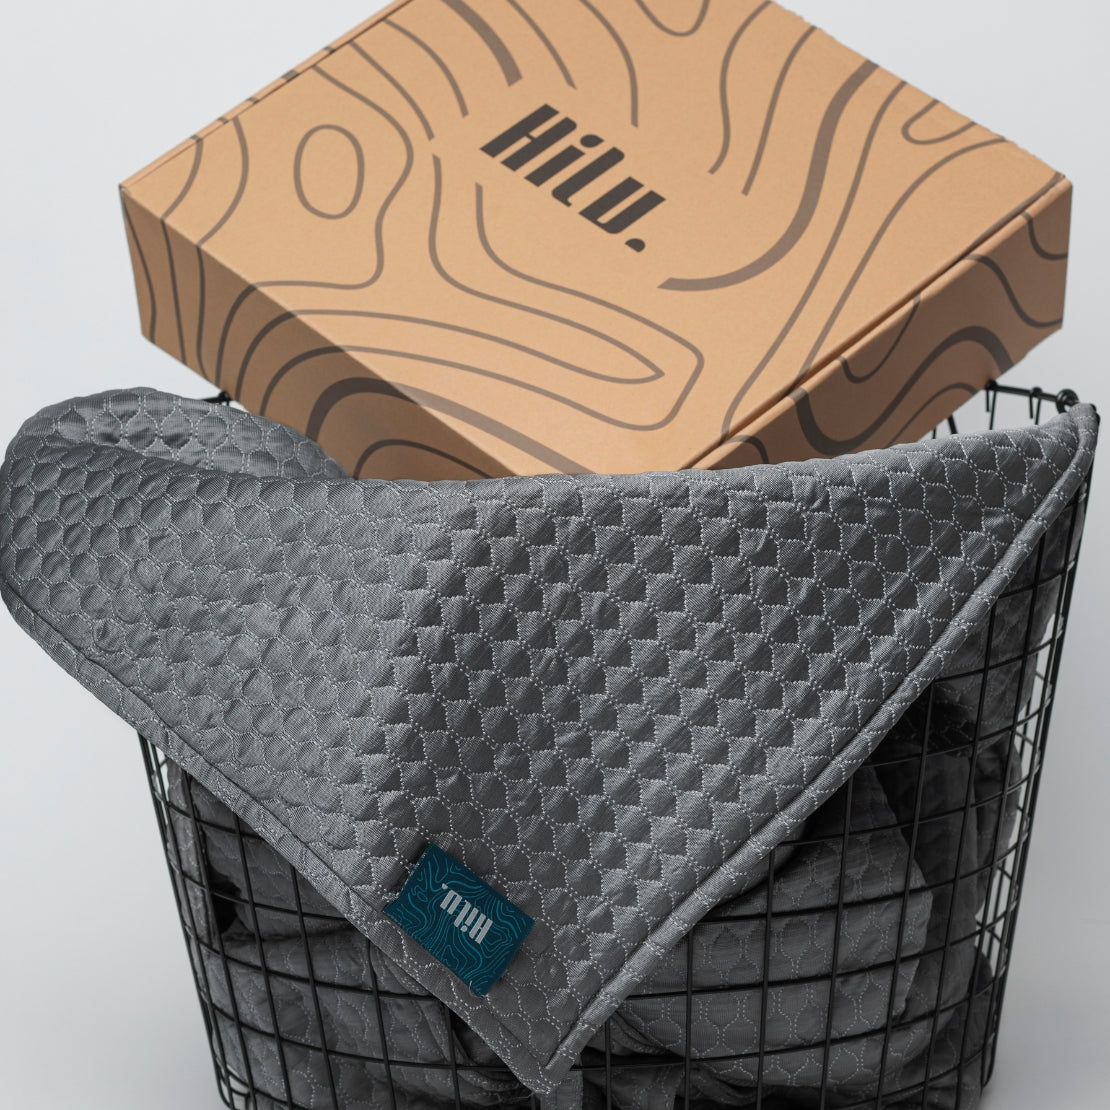 A gray quilted blanket with the brand label 'HILU' draped over a black metal basket. Above it, a uniquely designed cardboard box with 'HILU' printed on it, showcasing abstract wavy patterns.